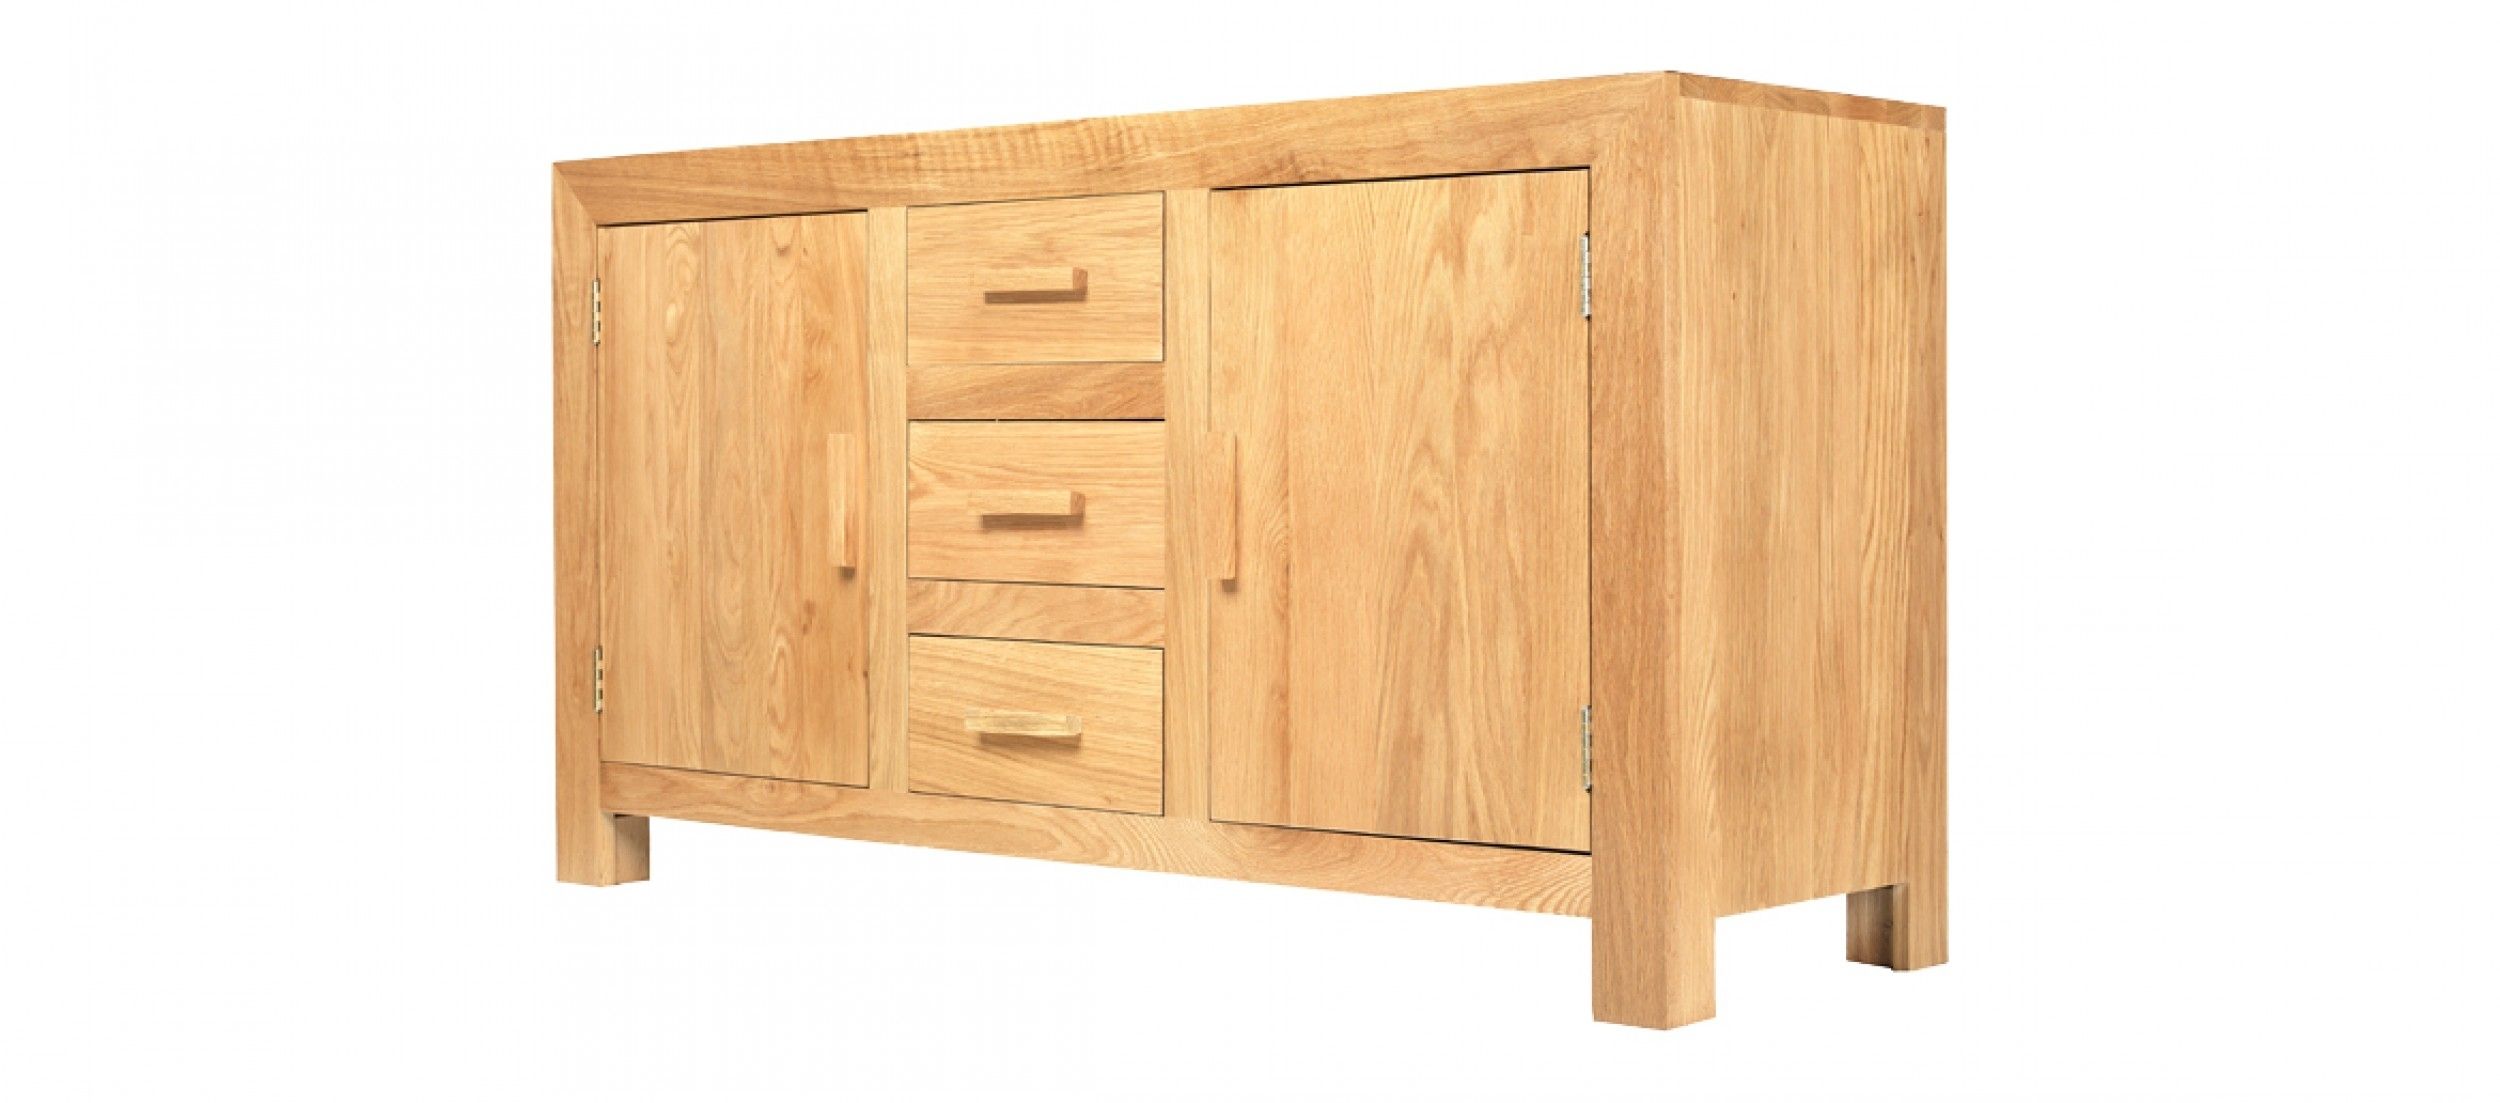 Cube Oak Large Sideboard | Quercus Living Throughout 2 Door/2 Drawer Cast Jali Sideboards (View 11 of 30)